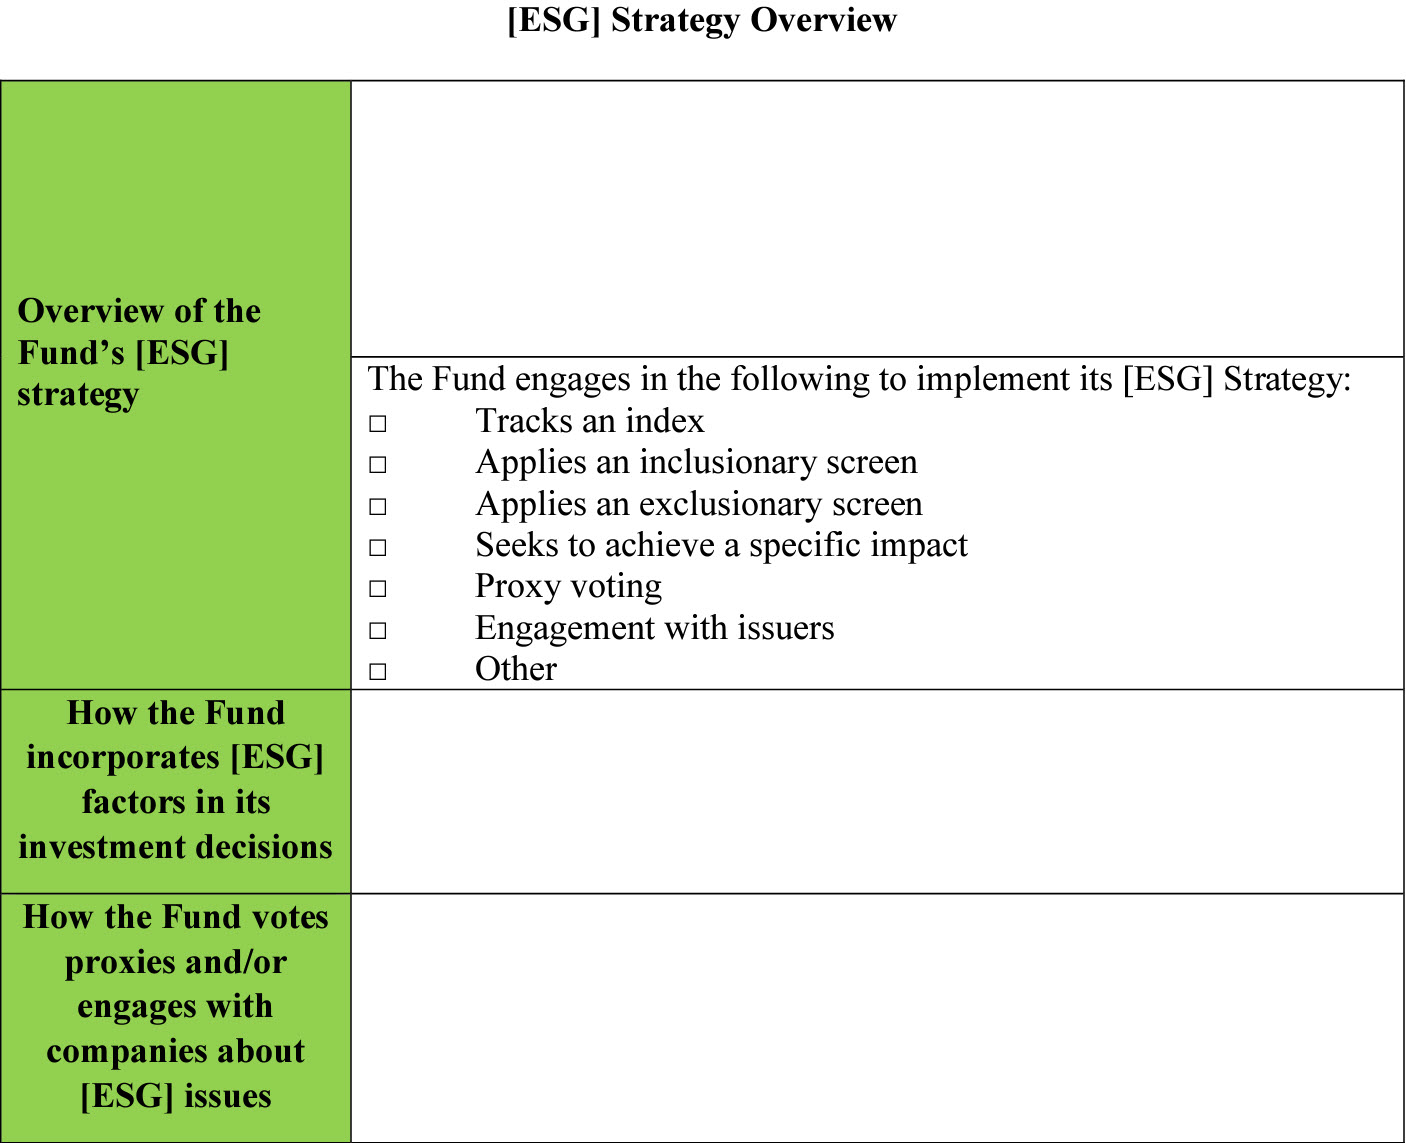 An image of the ESG Strategy Overview from the SEC